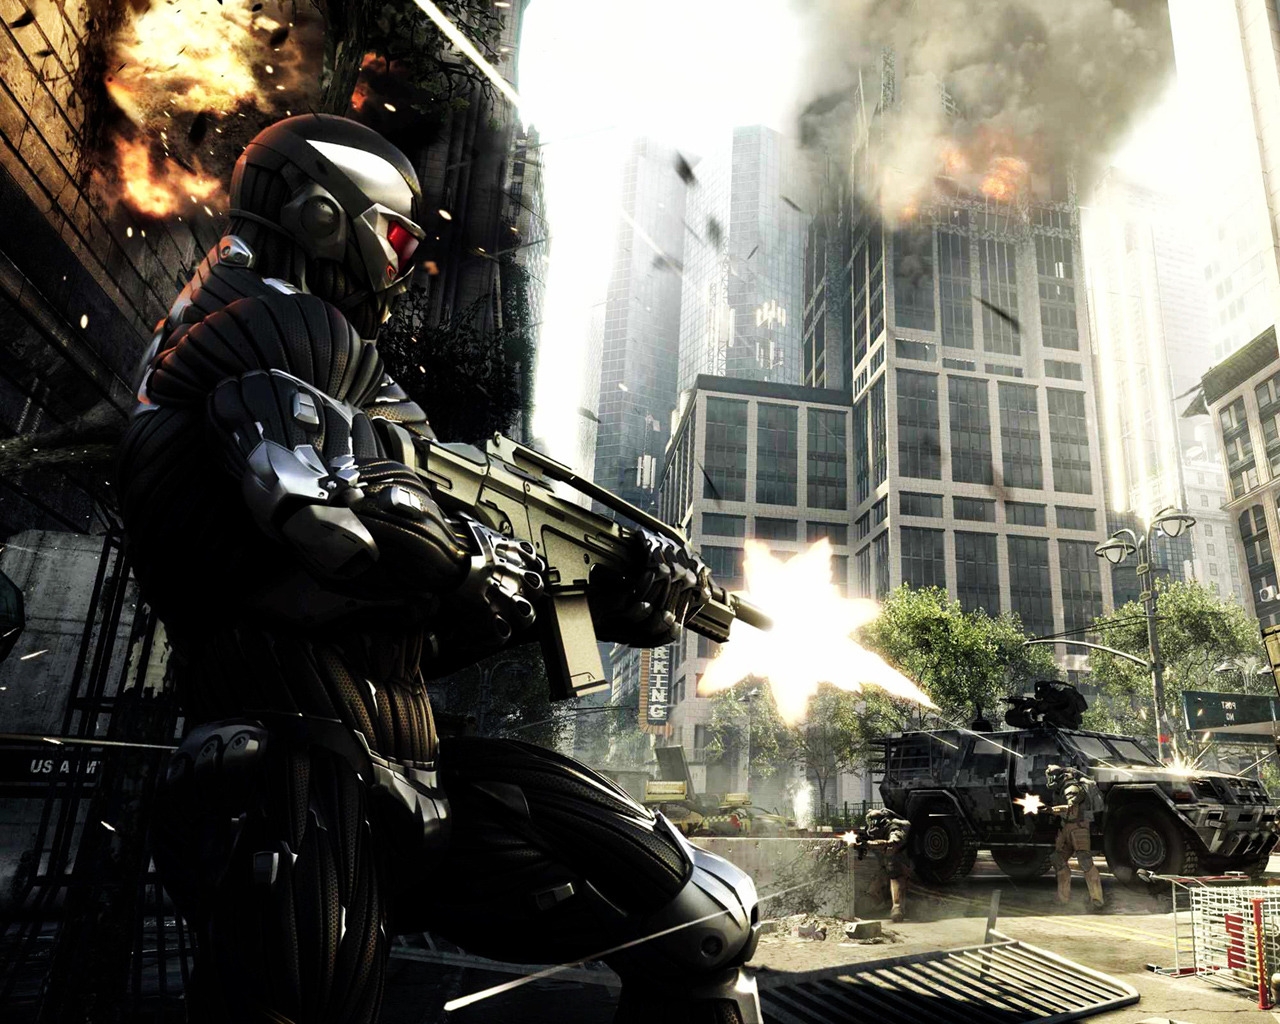 Crysis 2 Scene for 1280 x 1024 resolution